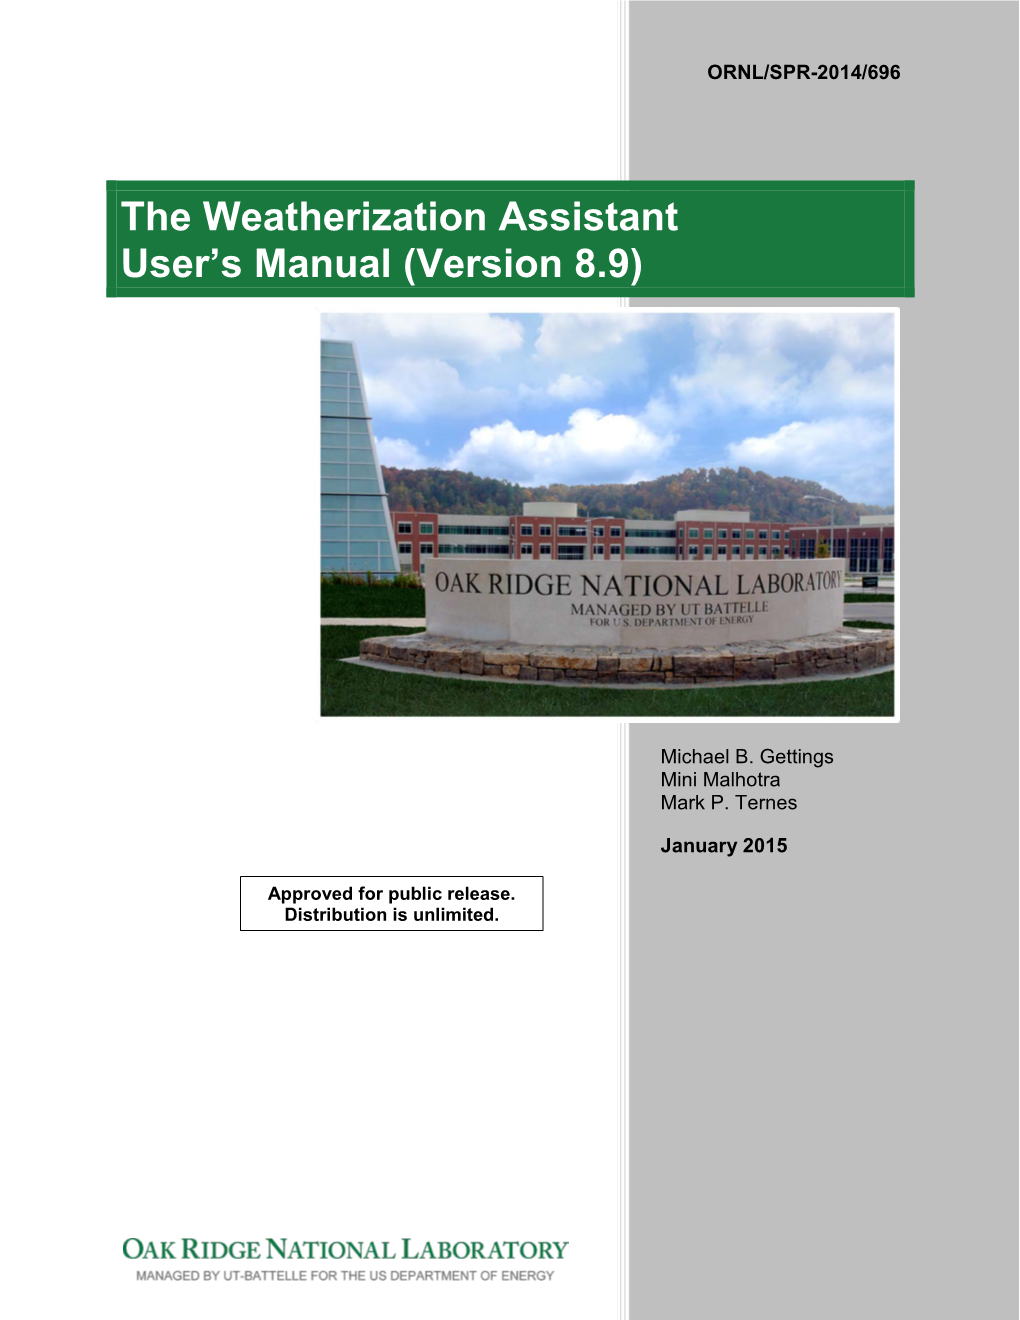 The Weatherization Assistant User's Manual (Version 8.9)